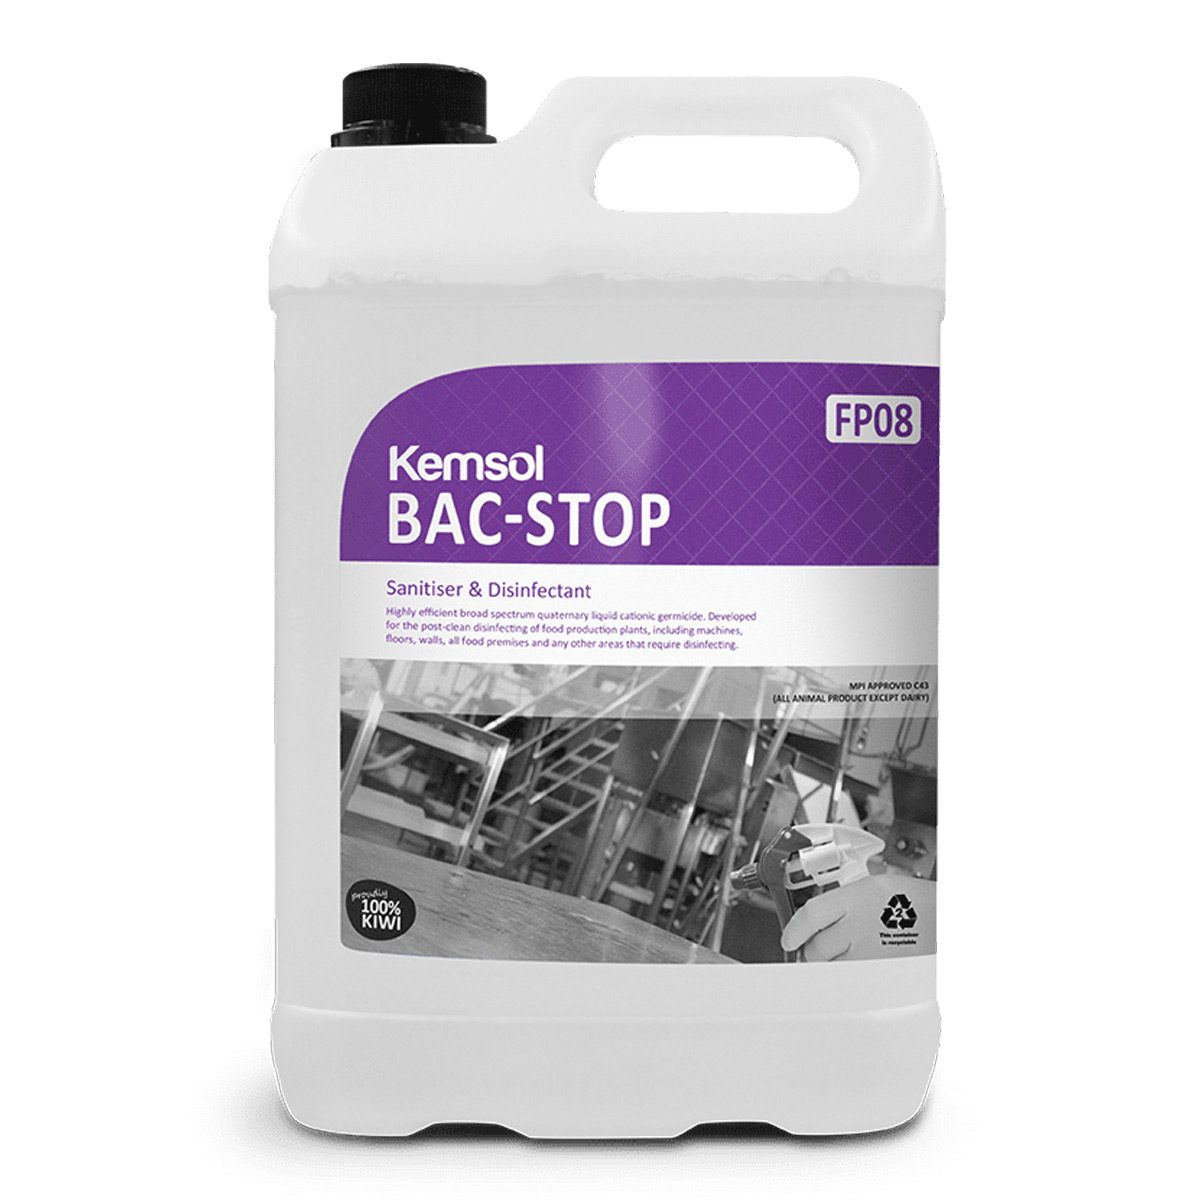 cleaning-products-floorcare-kemsol-bac-stop-sanitiser-and-disinfectant-broad-spectrum-liquid-cationic-germicide-post-clean-disinfecting-food-production-machines-floors-walls-vjs-distributors-KBACSKU